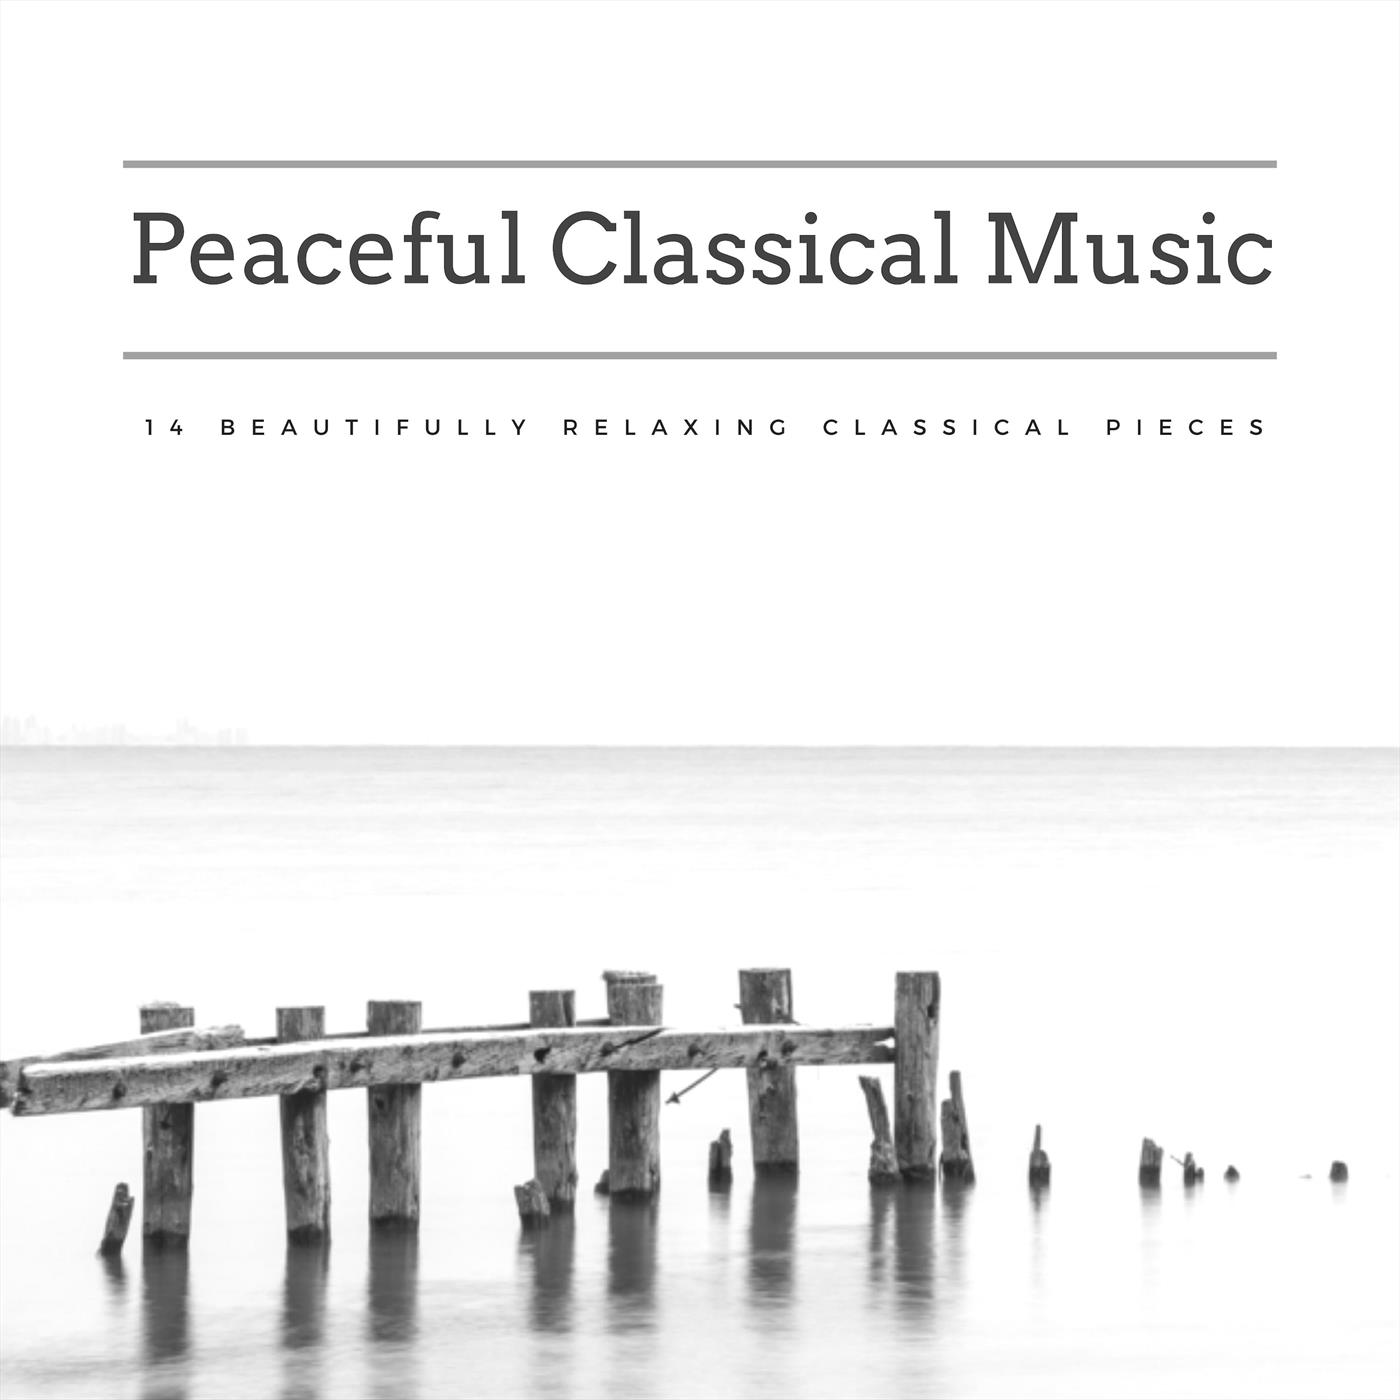 Peaceful Classical Music: 14 Beautifully Relaxing Classical Pieces